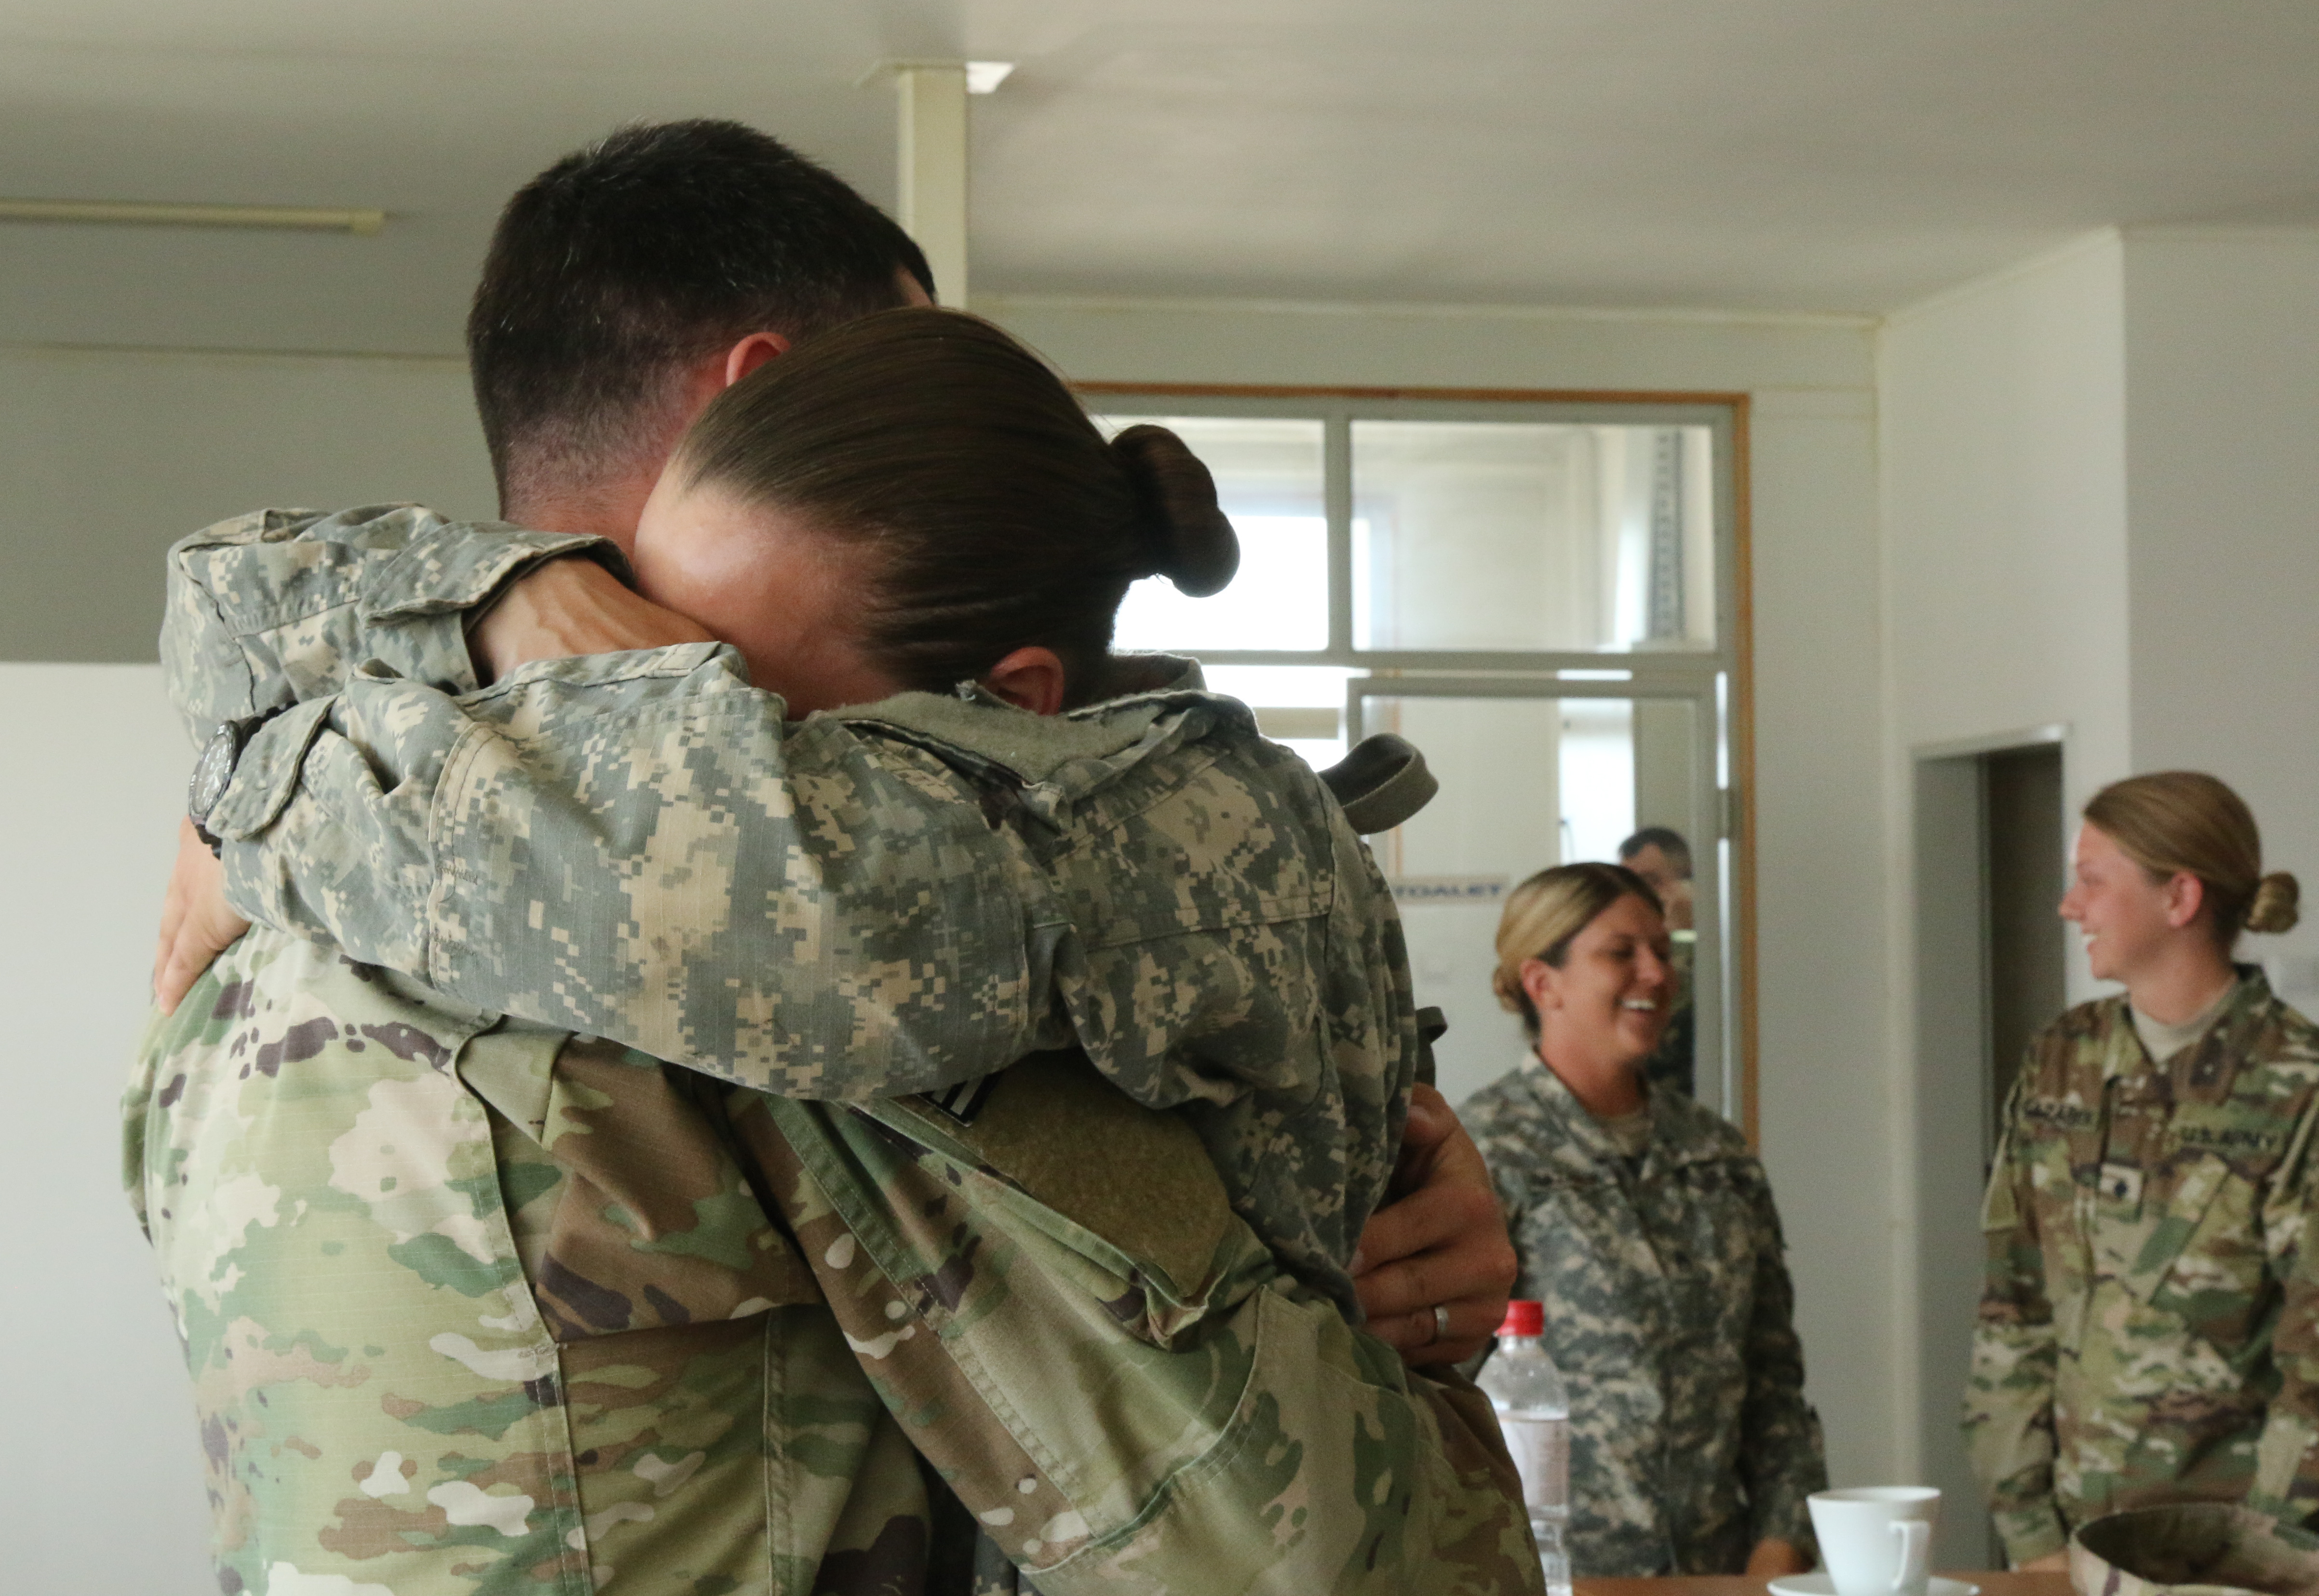 Army Spc. Mackenzie Crawford, a military police officer with the 585th Military Police Company, embraces her brother Army Spc. Matthew Crawford, who is currently deployed to Kosovo with Headquarters Headquarters Company for a peacekeeping operation, on June 21, 2017 on South Base, Serbia. Mackenzie is here in Serbia for Paltinum Wolf. (U.S. Army photo by Spc. Emilie Sheridan/Released)
